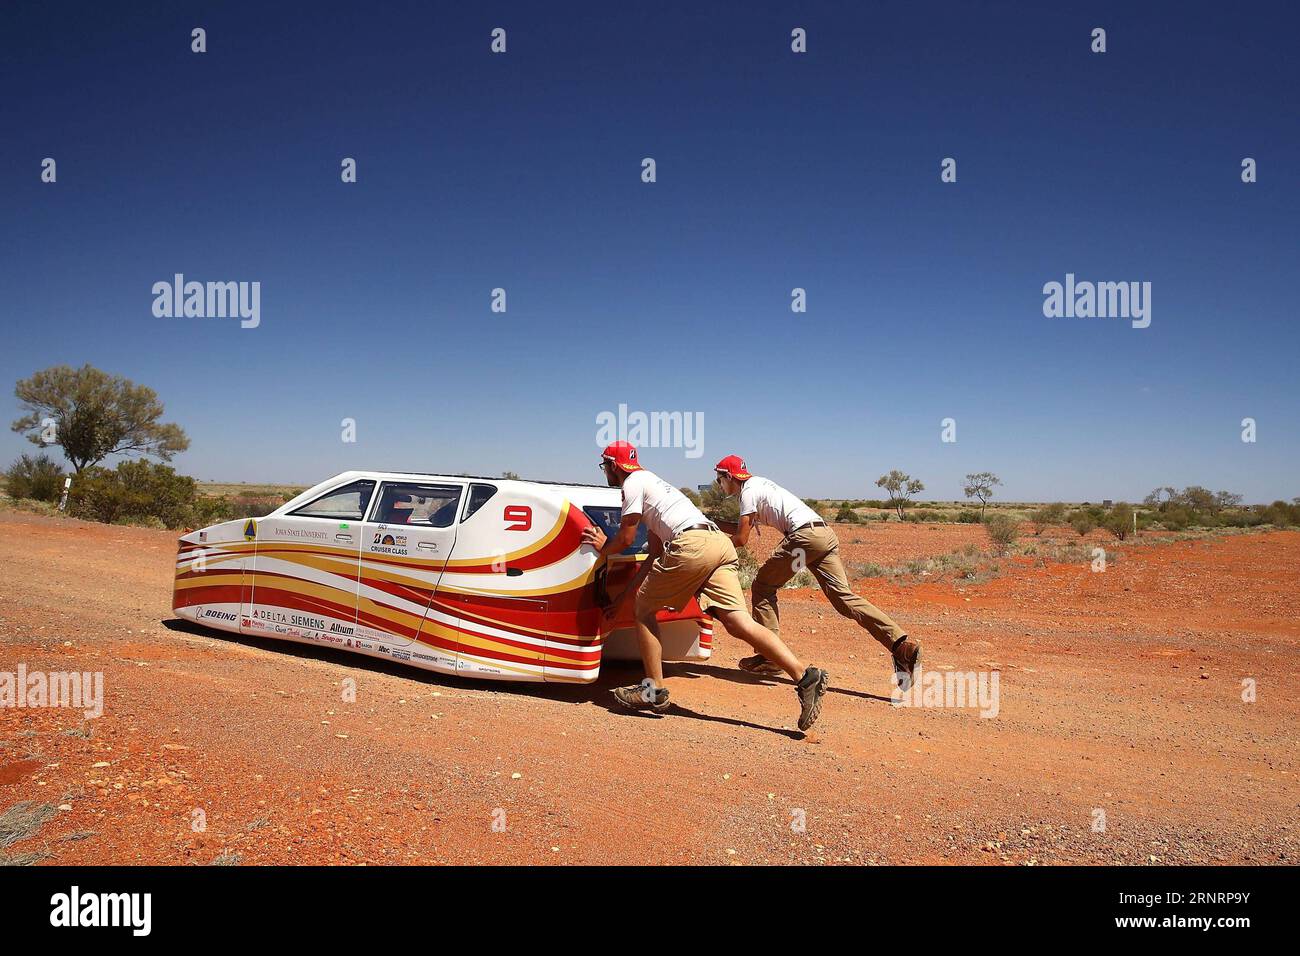 (171012) -- CANBERRA, Oct. 12, 2017 -- Team members of PrISUn from the USA push their vehicle Penumbra back to the Stuart Highway after a break from the racing between Marla Bora and Coober Pedy, South Australia, during the hallenge on Oct. 12, 2017. hallenge) (SP)AUSTRALIA-CANBERRA-2017 WORLD SOLAR CHALLENGE 2017xBridgestonexWorldxSolarxC PUBLICATIONxNOTxINxCHN Stock Photo